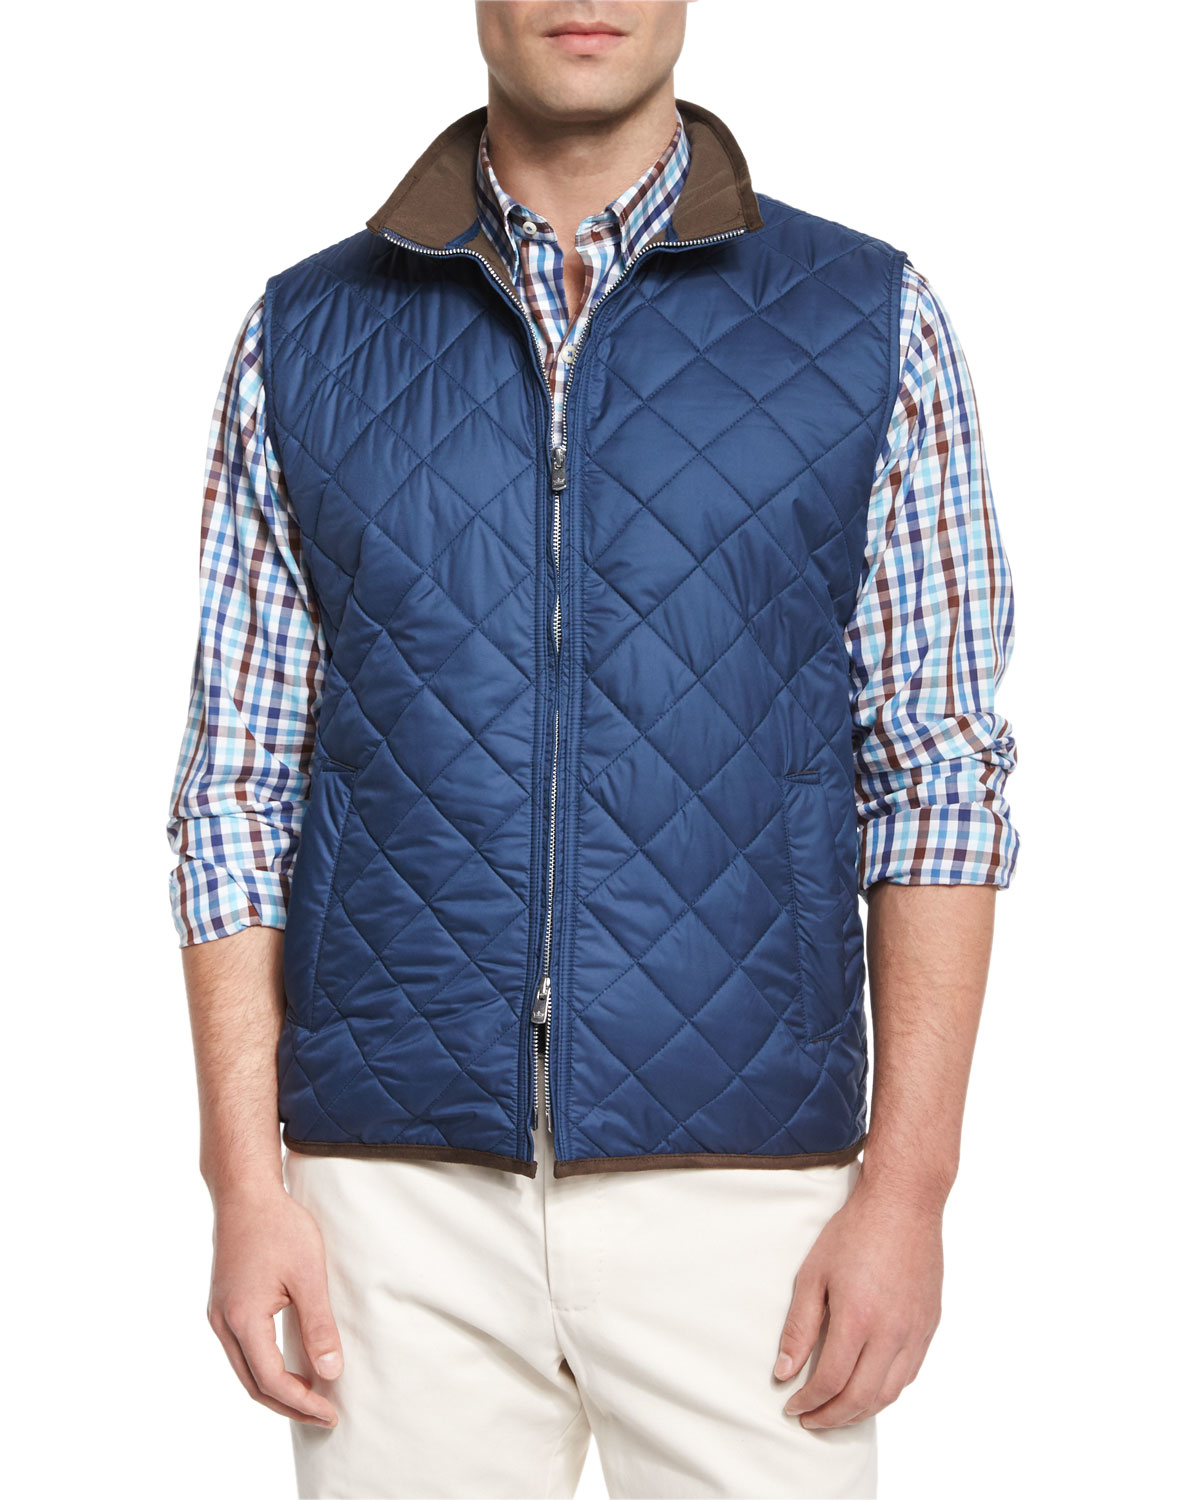 Lyst - Peter Millar Potomac Quilted Vest in Blue for Men